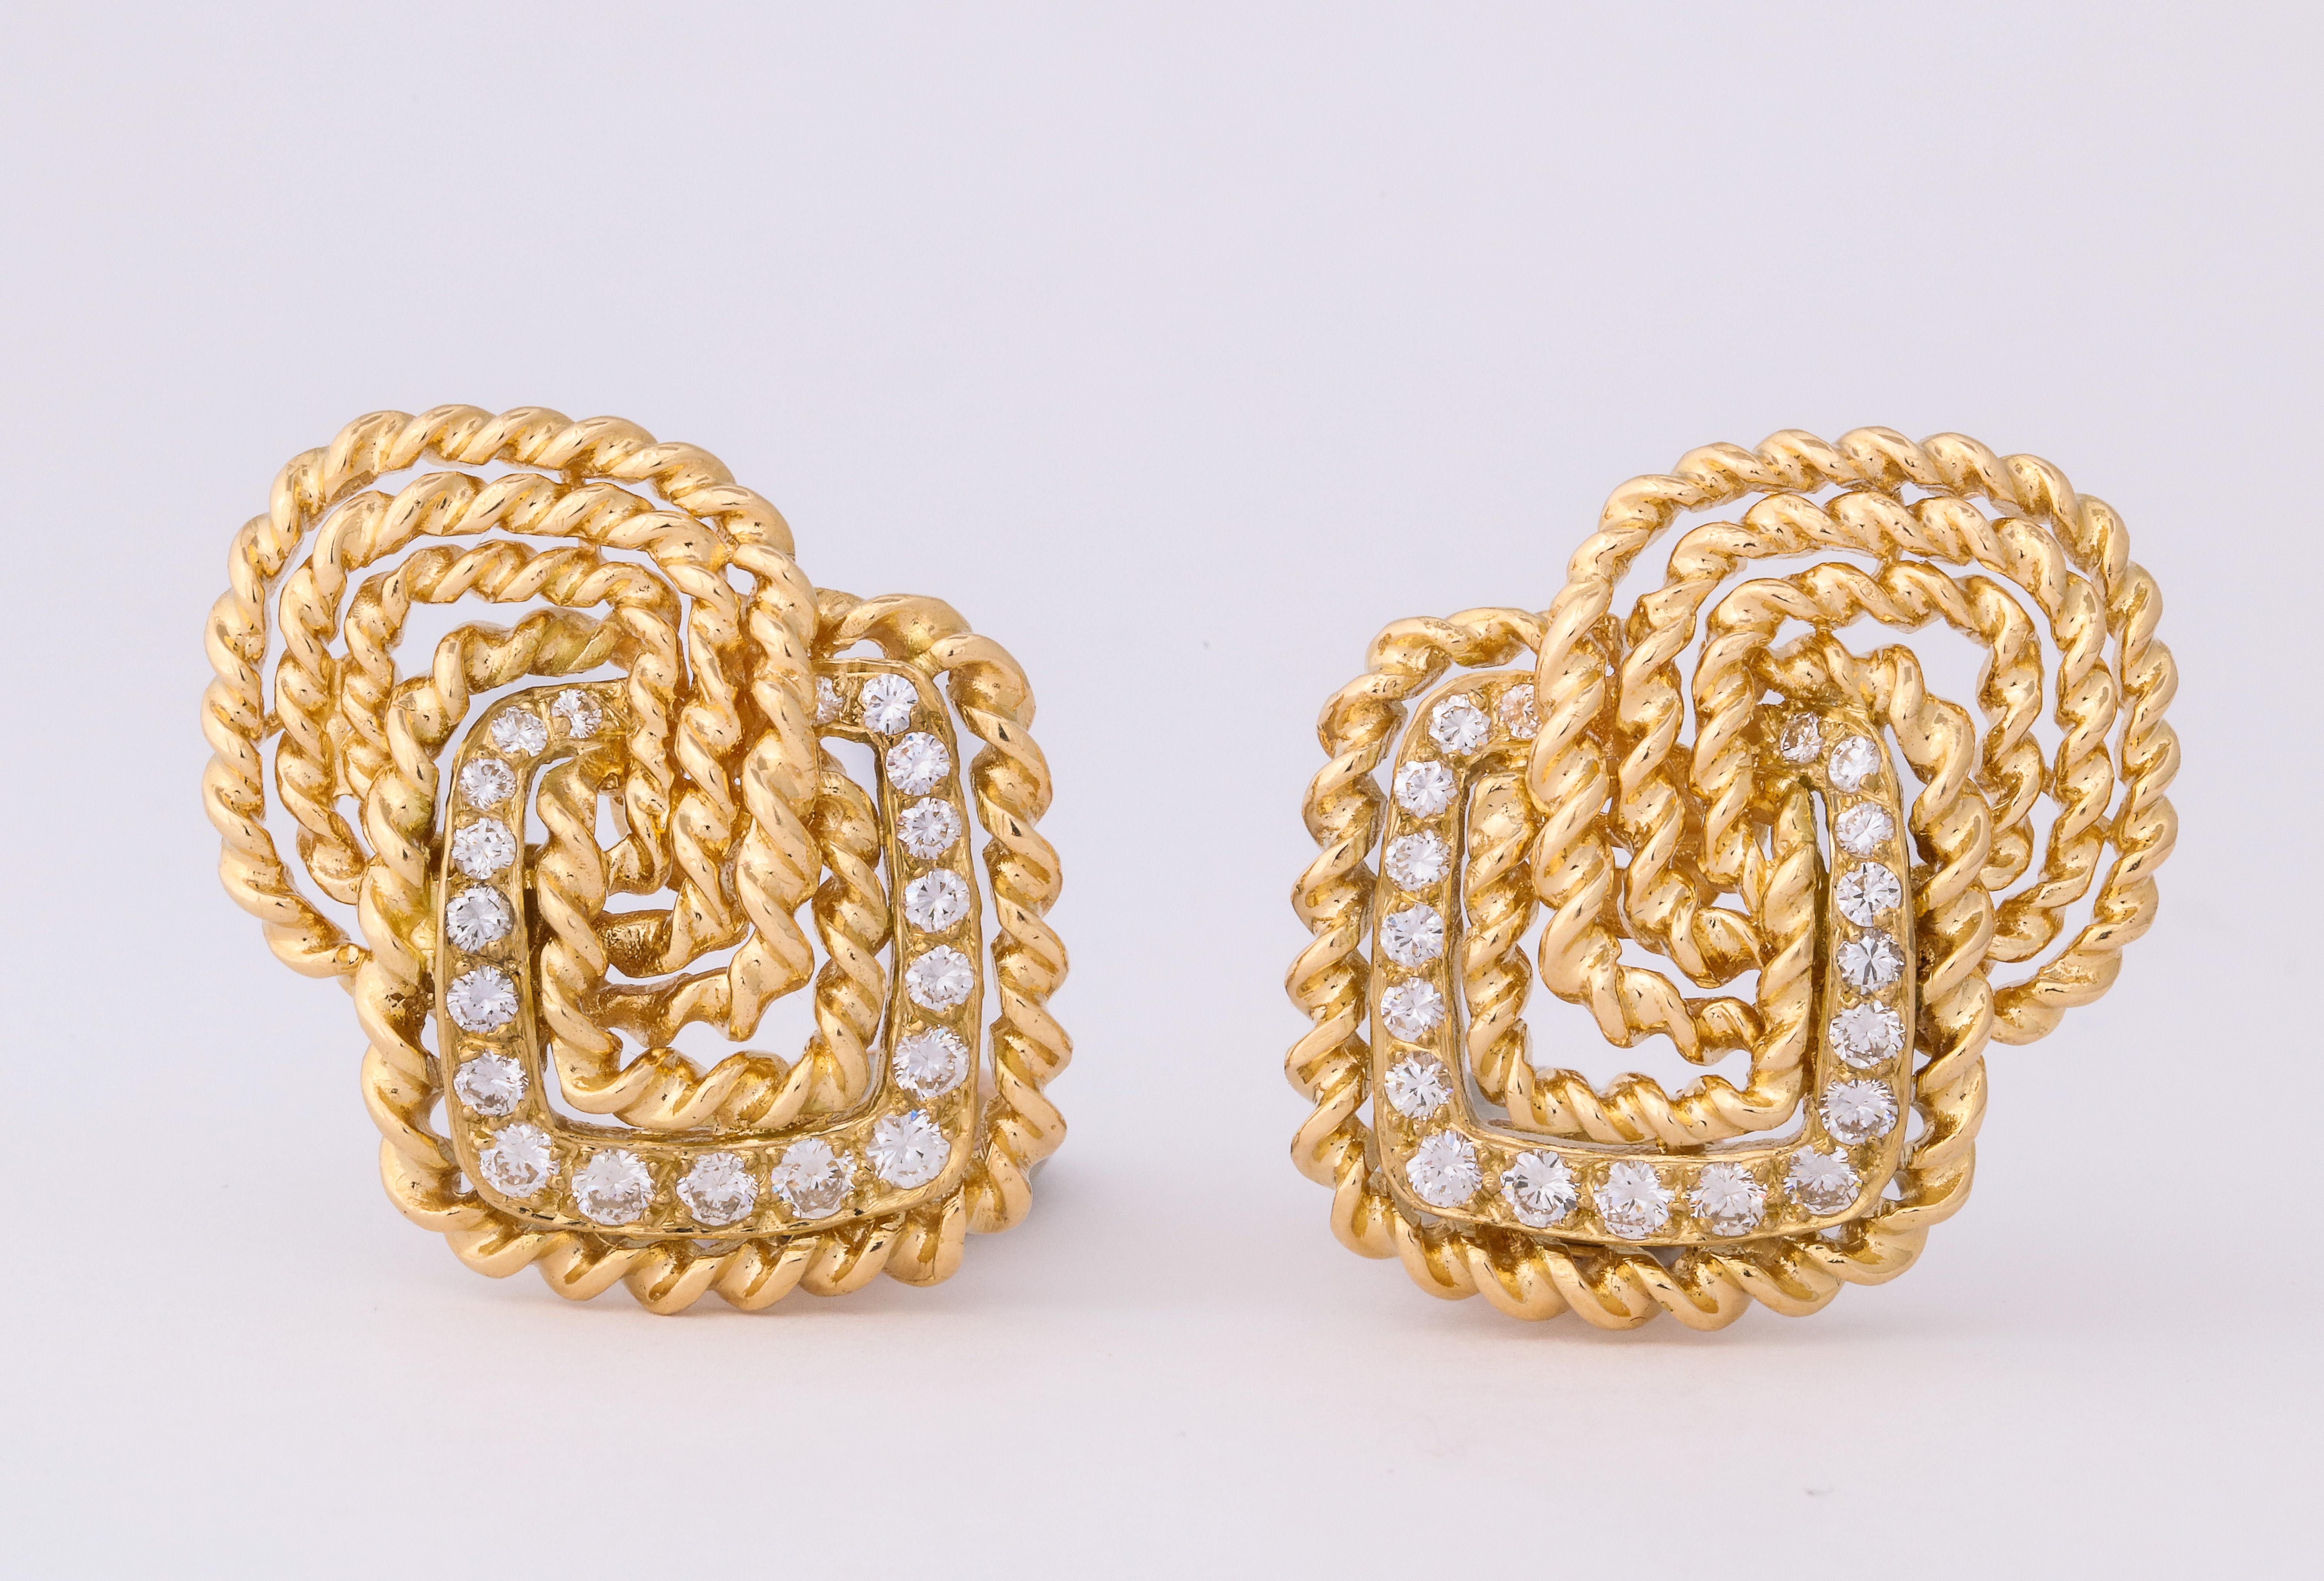 Van Cleef and Arpels was certainly one of the preeminent jewelers of the 1970's, and these bold earclips absolutely epitomize the period.  The twisted, rope gold design is quintessentially V.C.A. and the whitest diamonds add just the right touch of